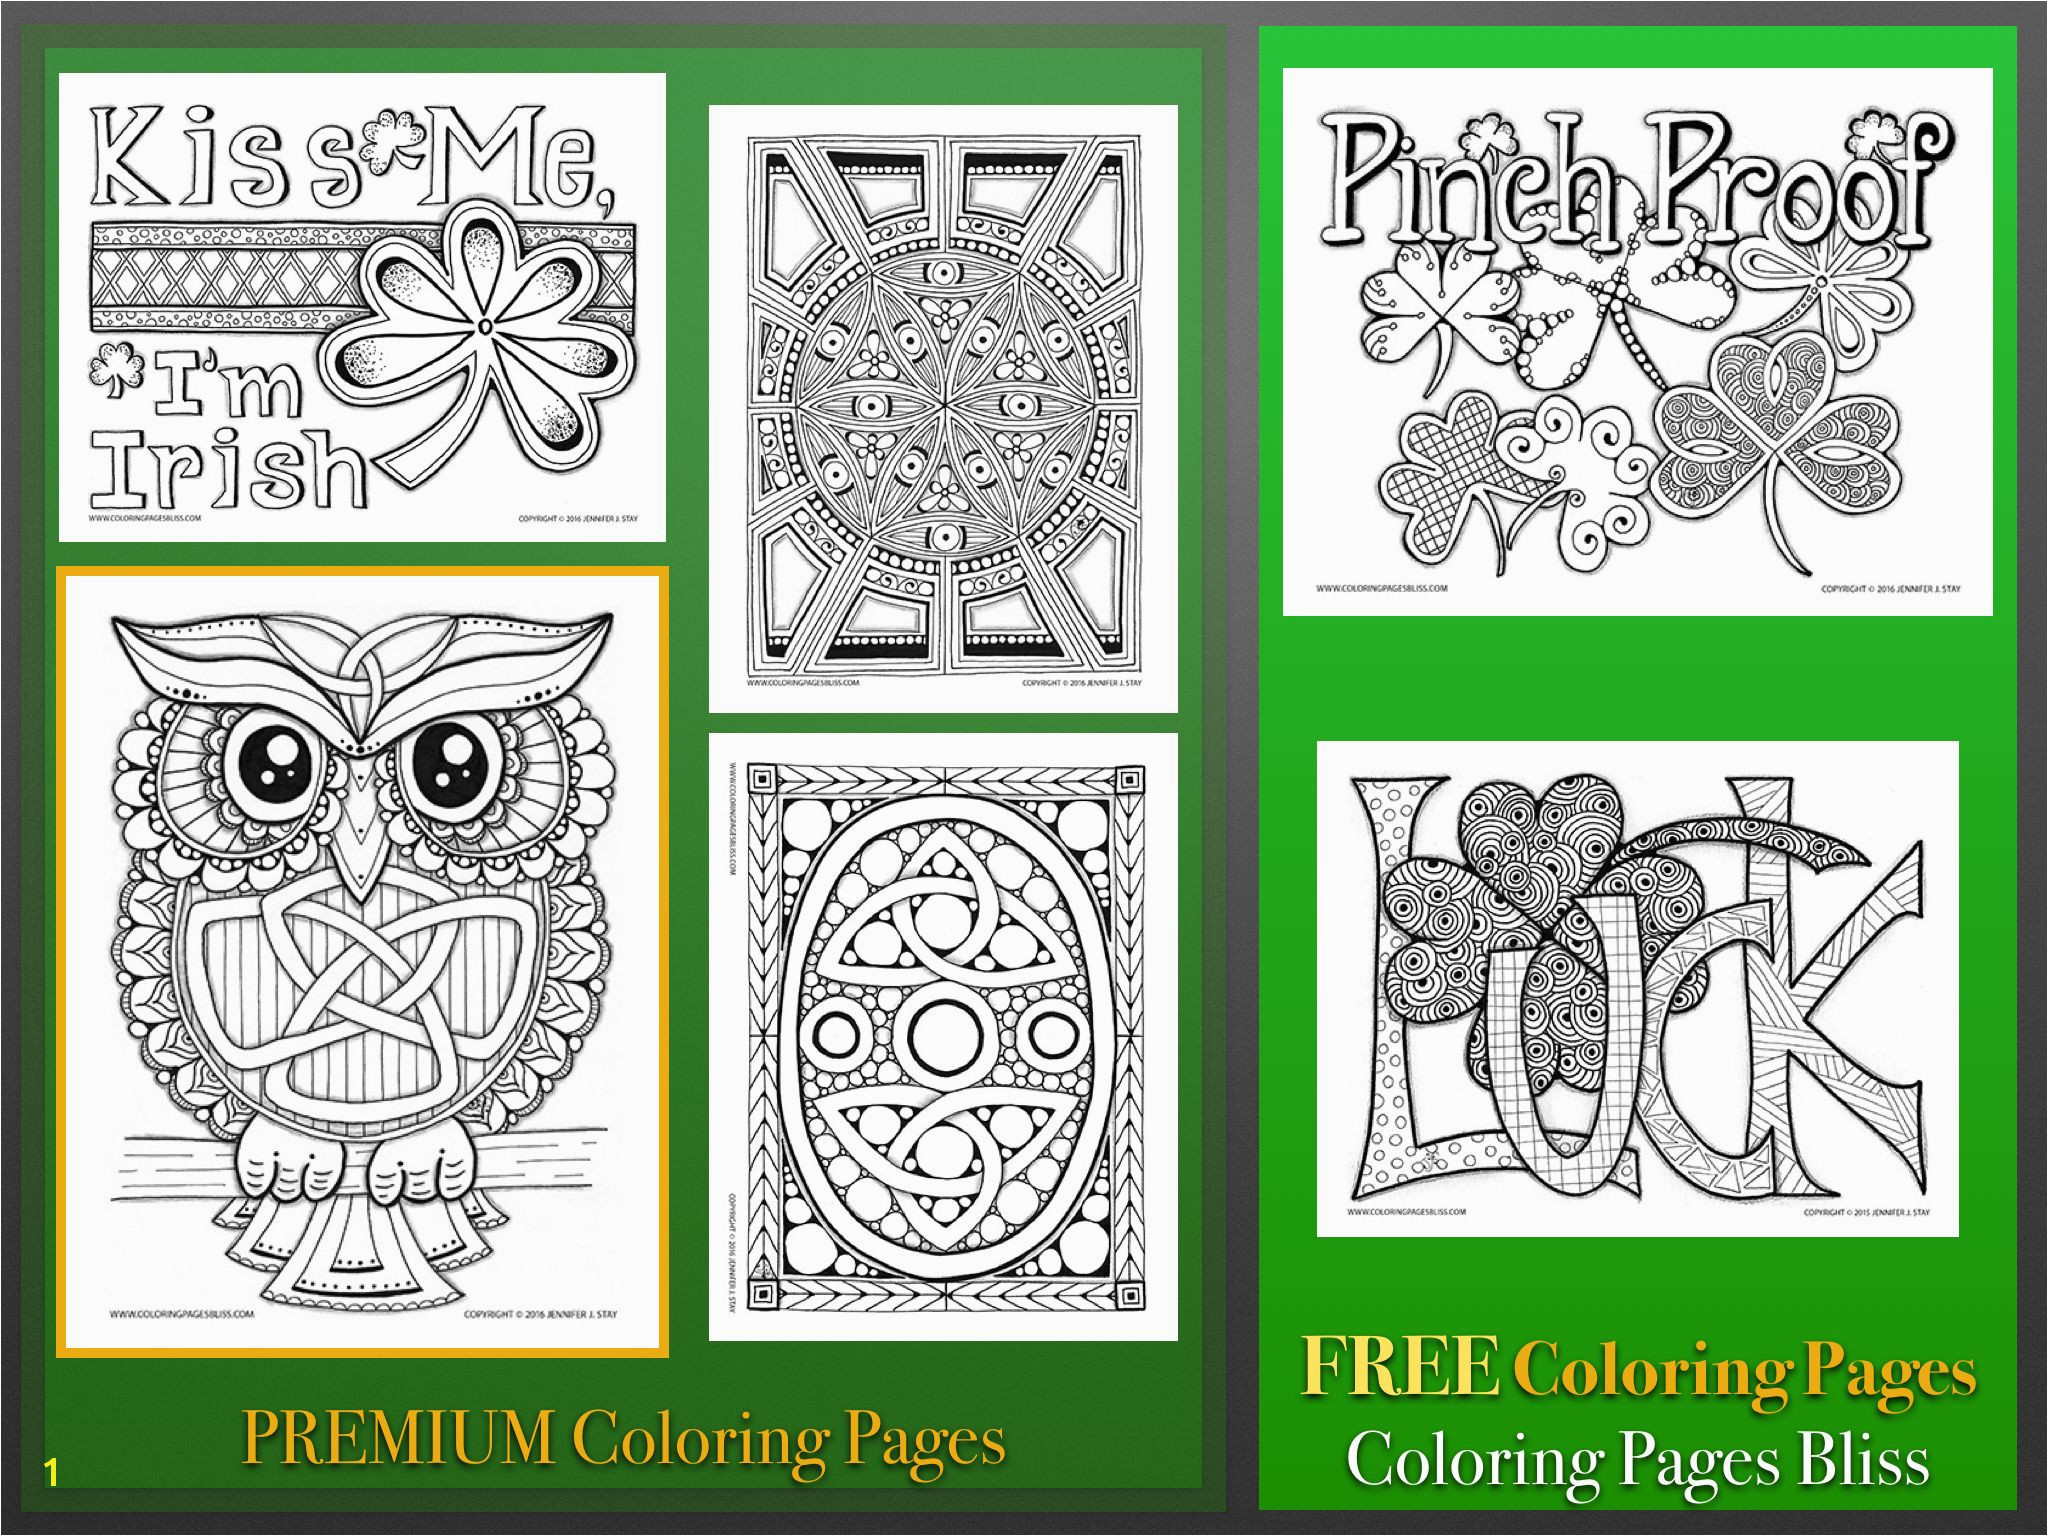 Downloadable coloring pages for adults hand drawn by Jennifer Stay and full of details to color FREE coloring pages available for a limited time